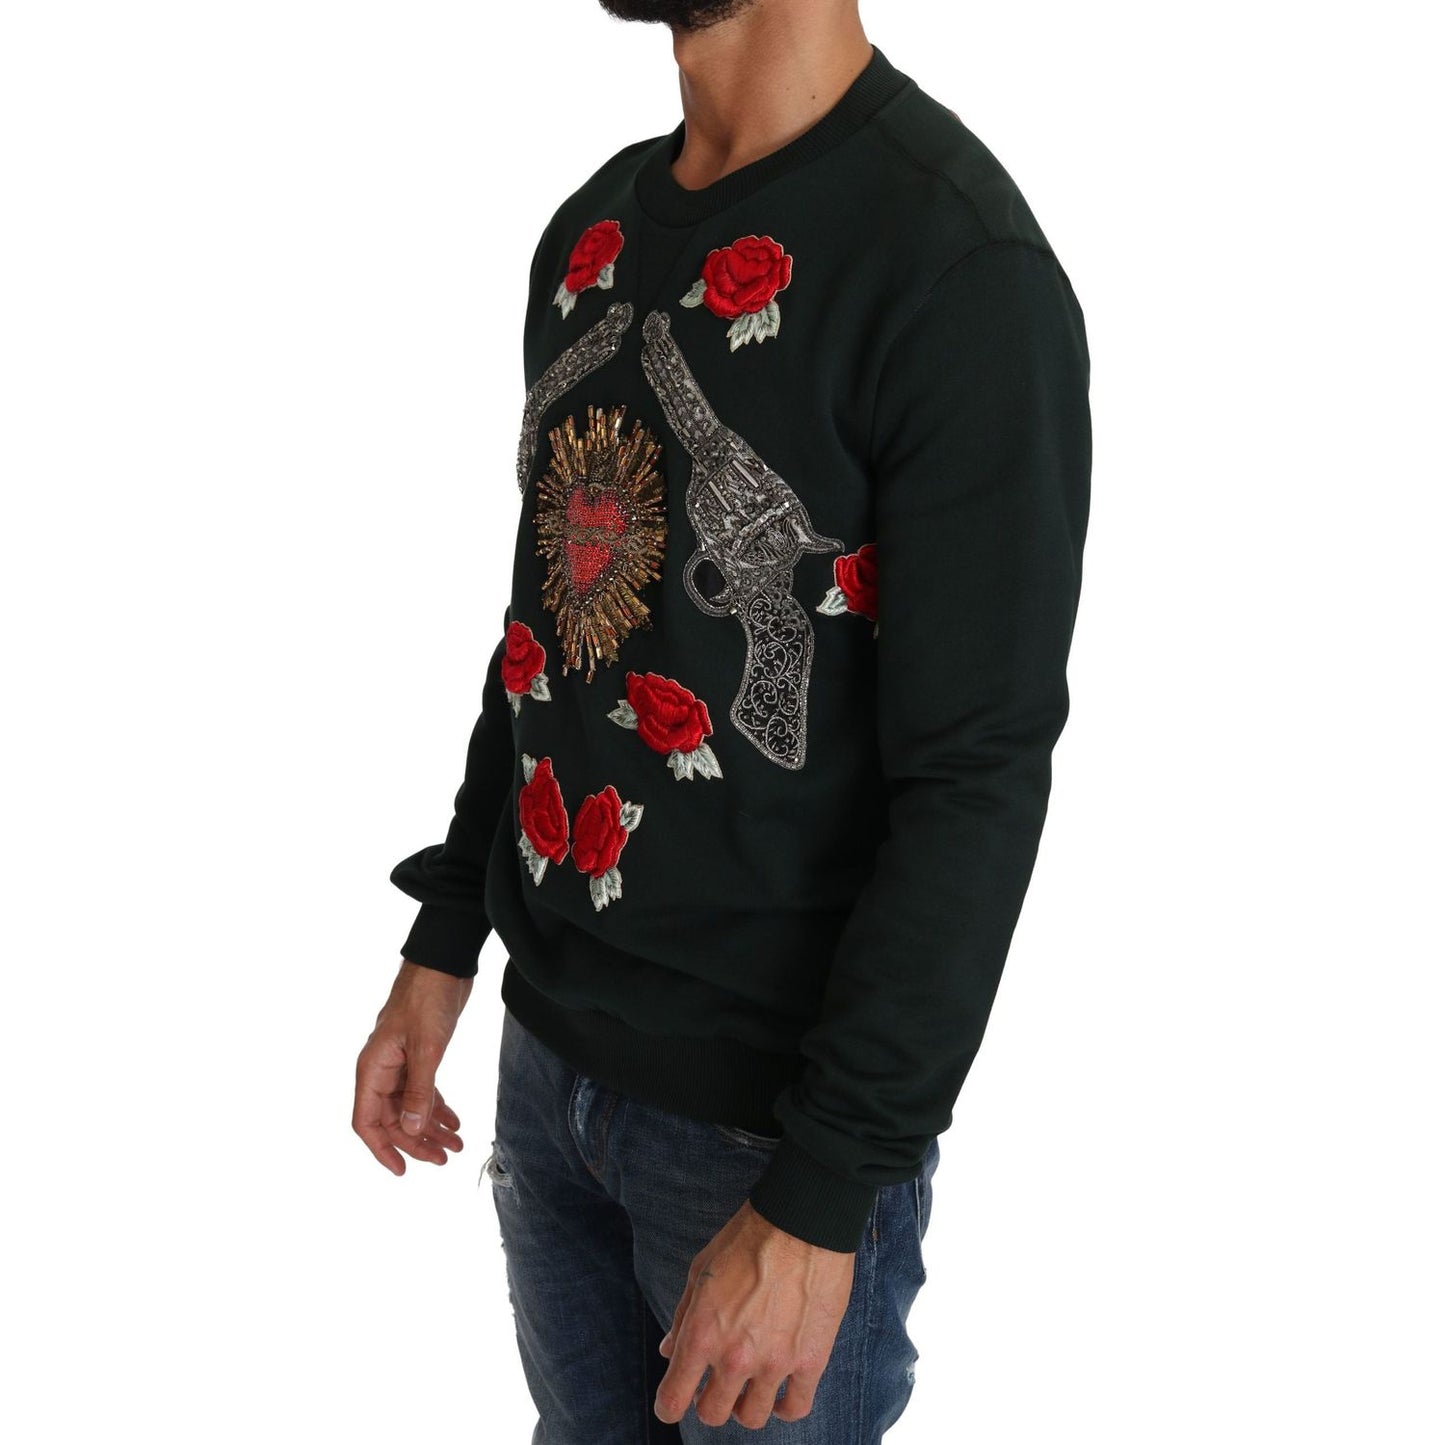 Dolce & Gabbana Emerald Cotton Sweater with Crystal Embroidery green-crystal-heart-roses-gun-sweater IMG_1247-scaled-8dda496a-db3.jpg